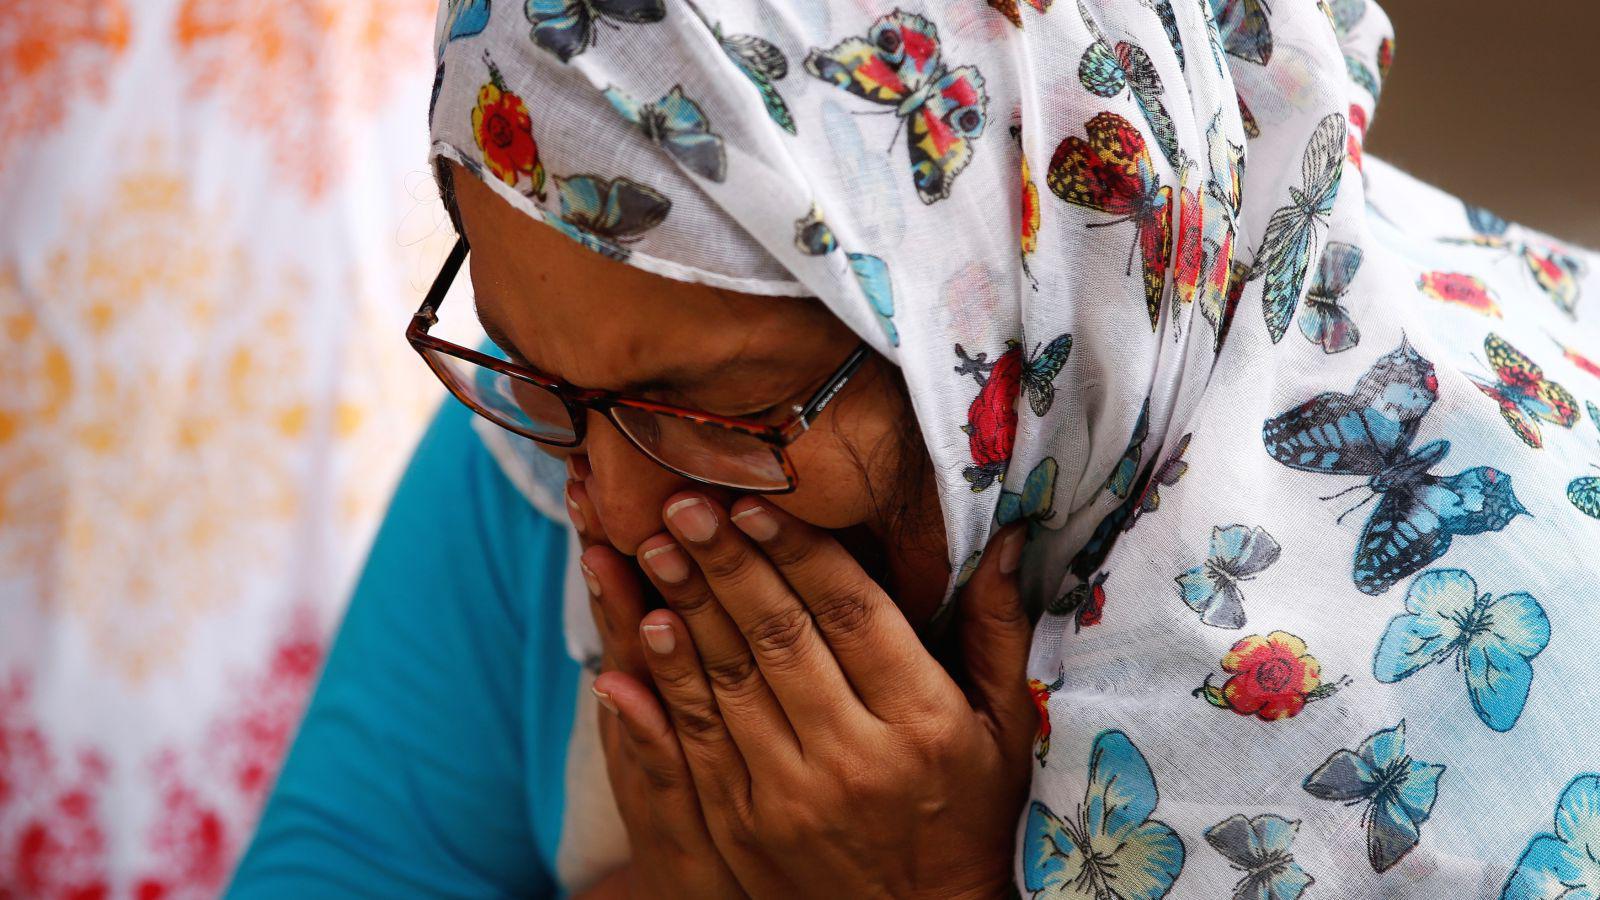 A woman mourns for the victims who were killed in the attack on the Holey Artisan Bakery and the O'Kitchen Restaurant, at a makeshift memorial near the attack site, in Dhaka, Bangladesh, July 5, 2016. 